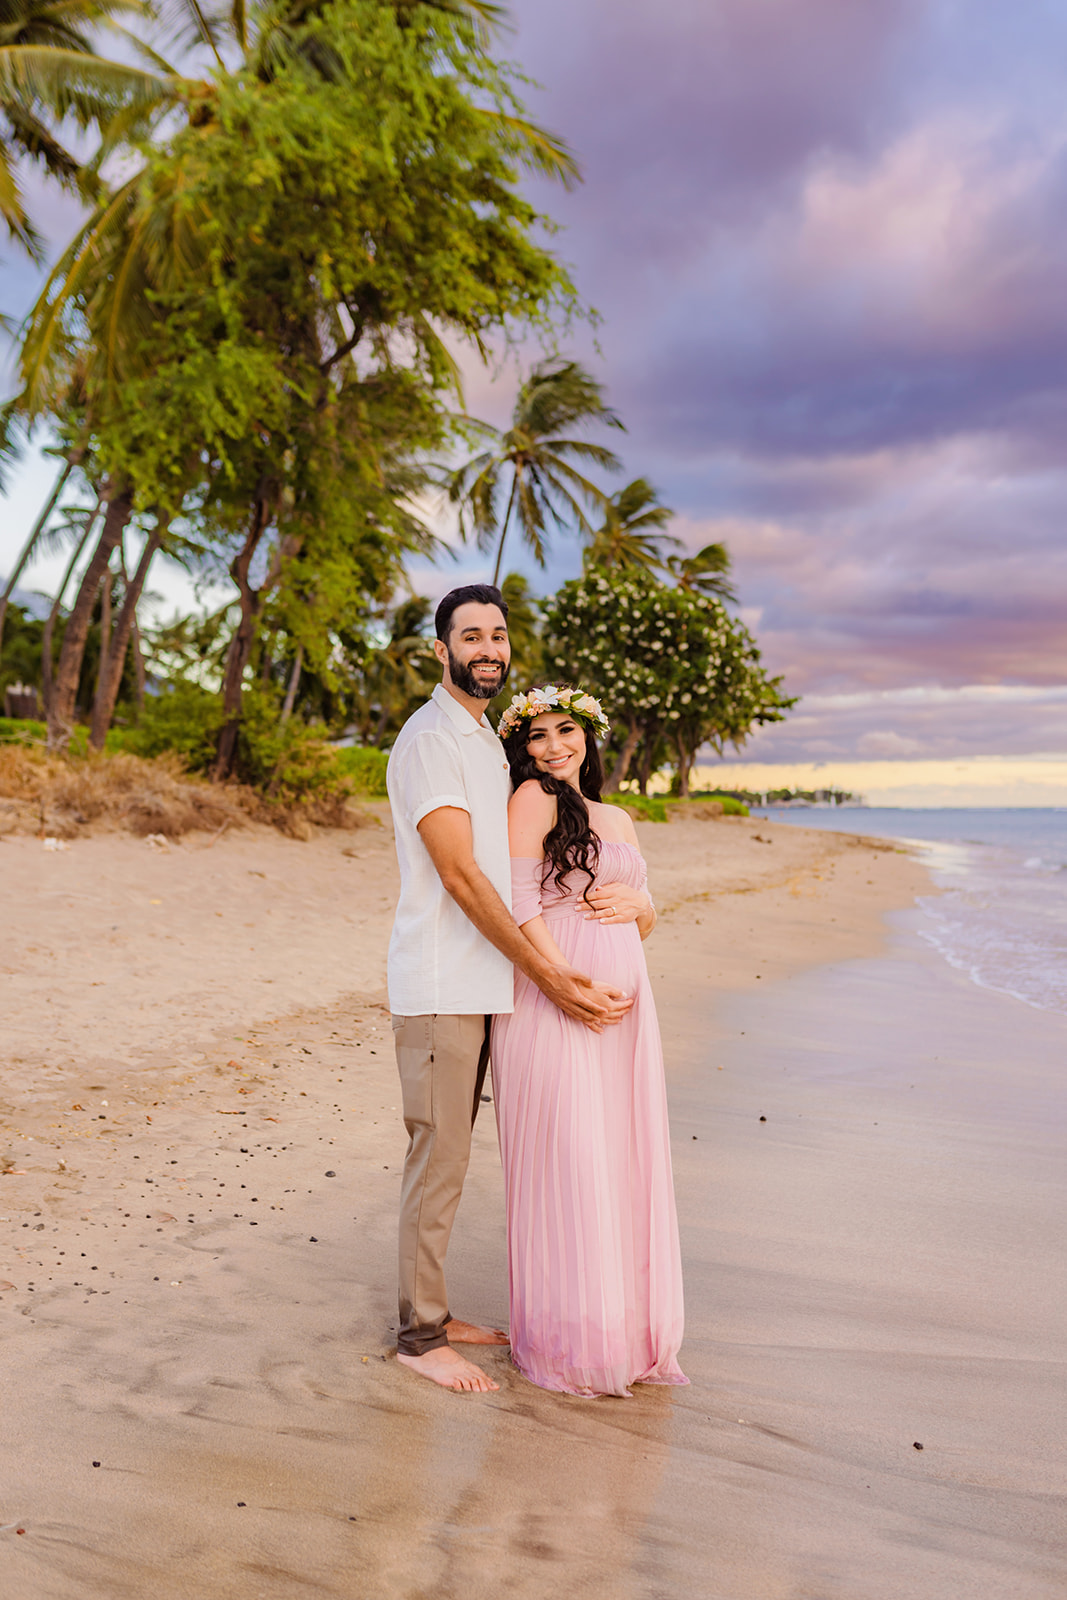 man stands on the beach barefoot in a white shirt and beige pants holding the baby bump of his partner standing in a pink dress with him